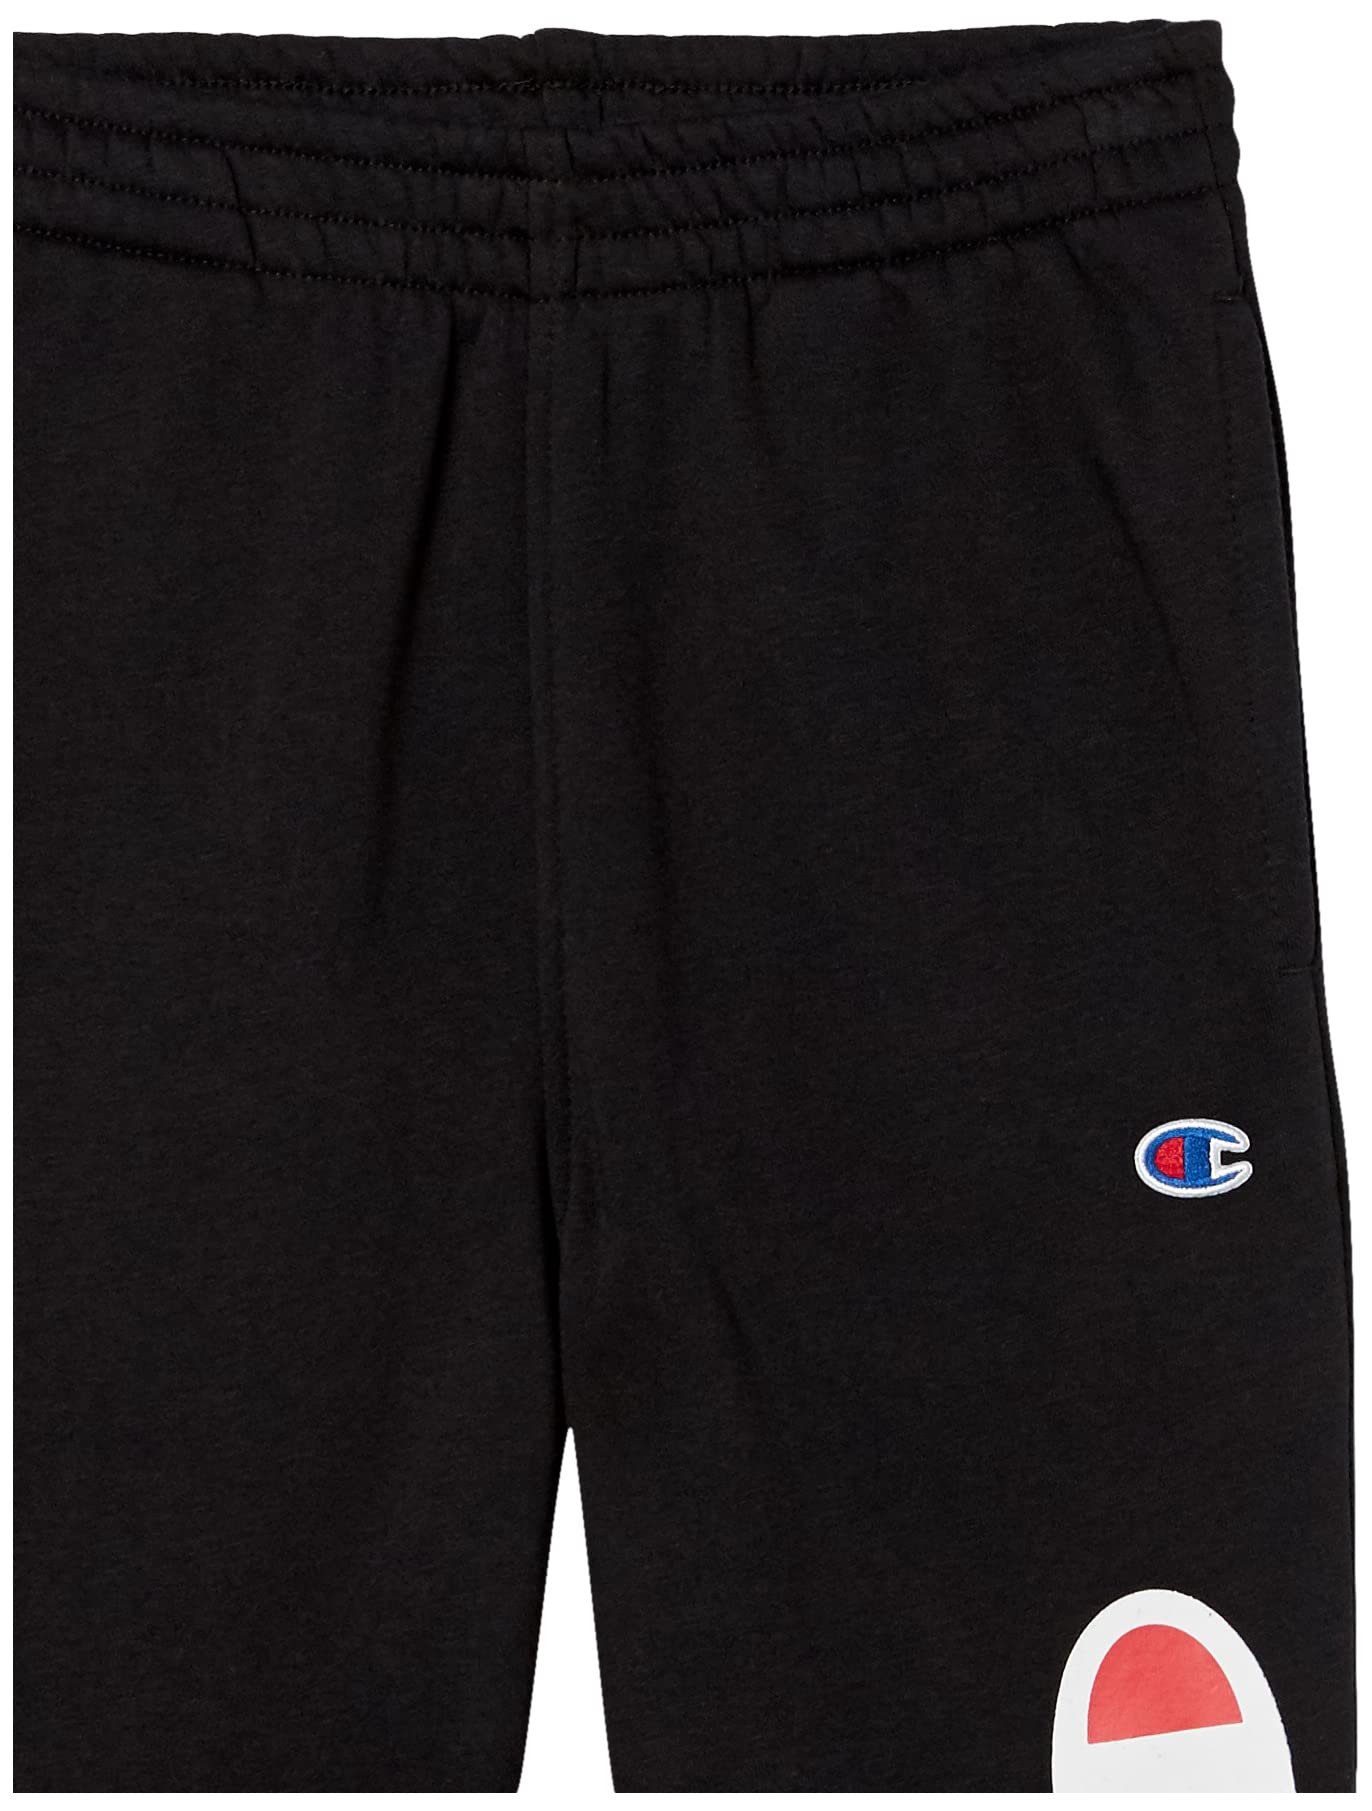 Champion Boys Sweatpant Heritage Collection Slim Fit Brushed Fleece Big and Little Boys Kids